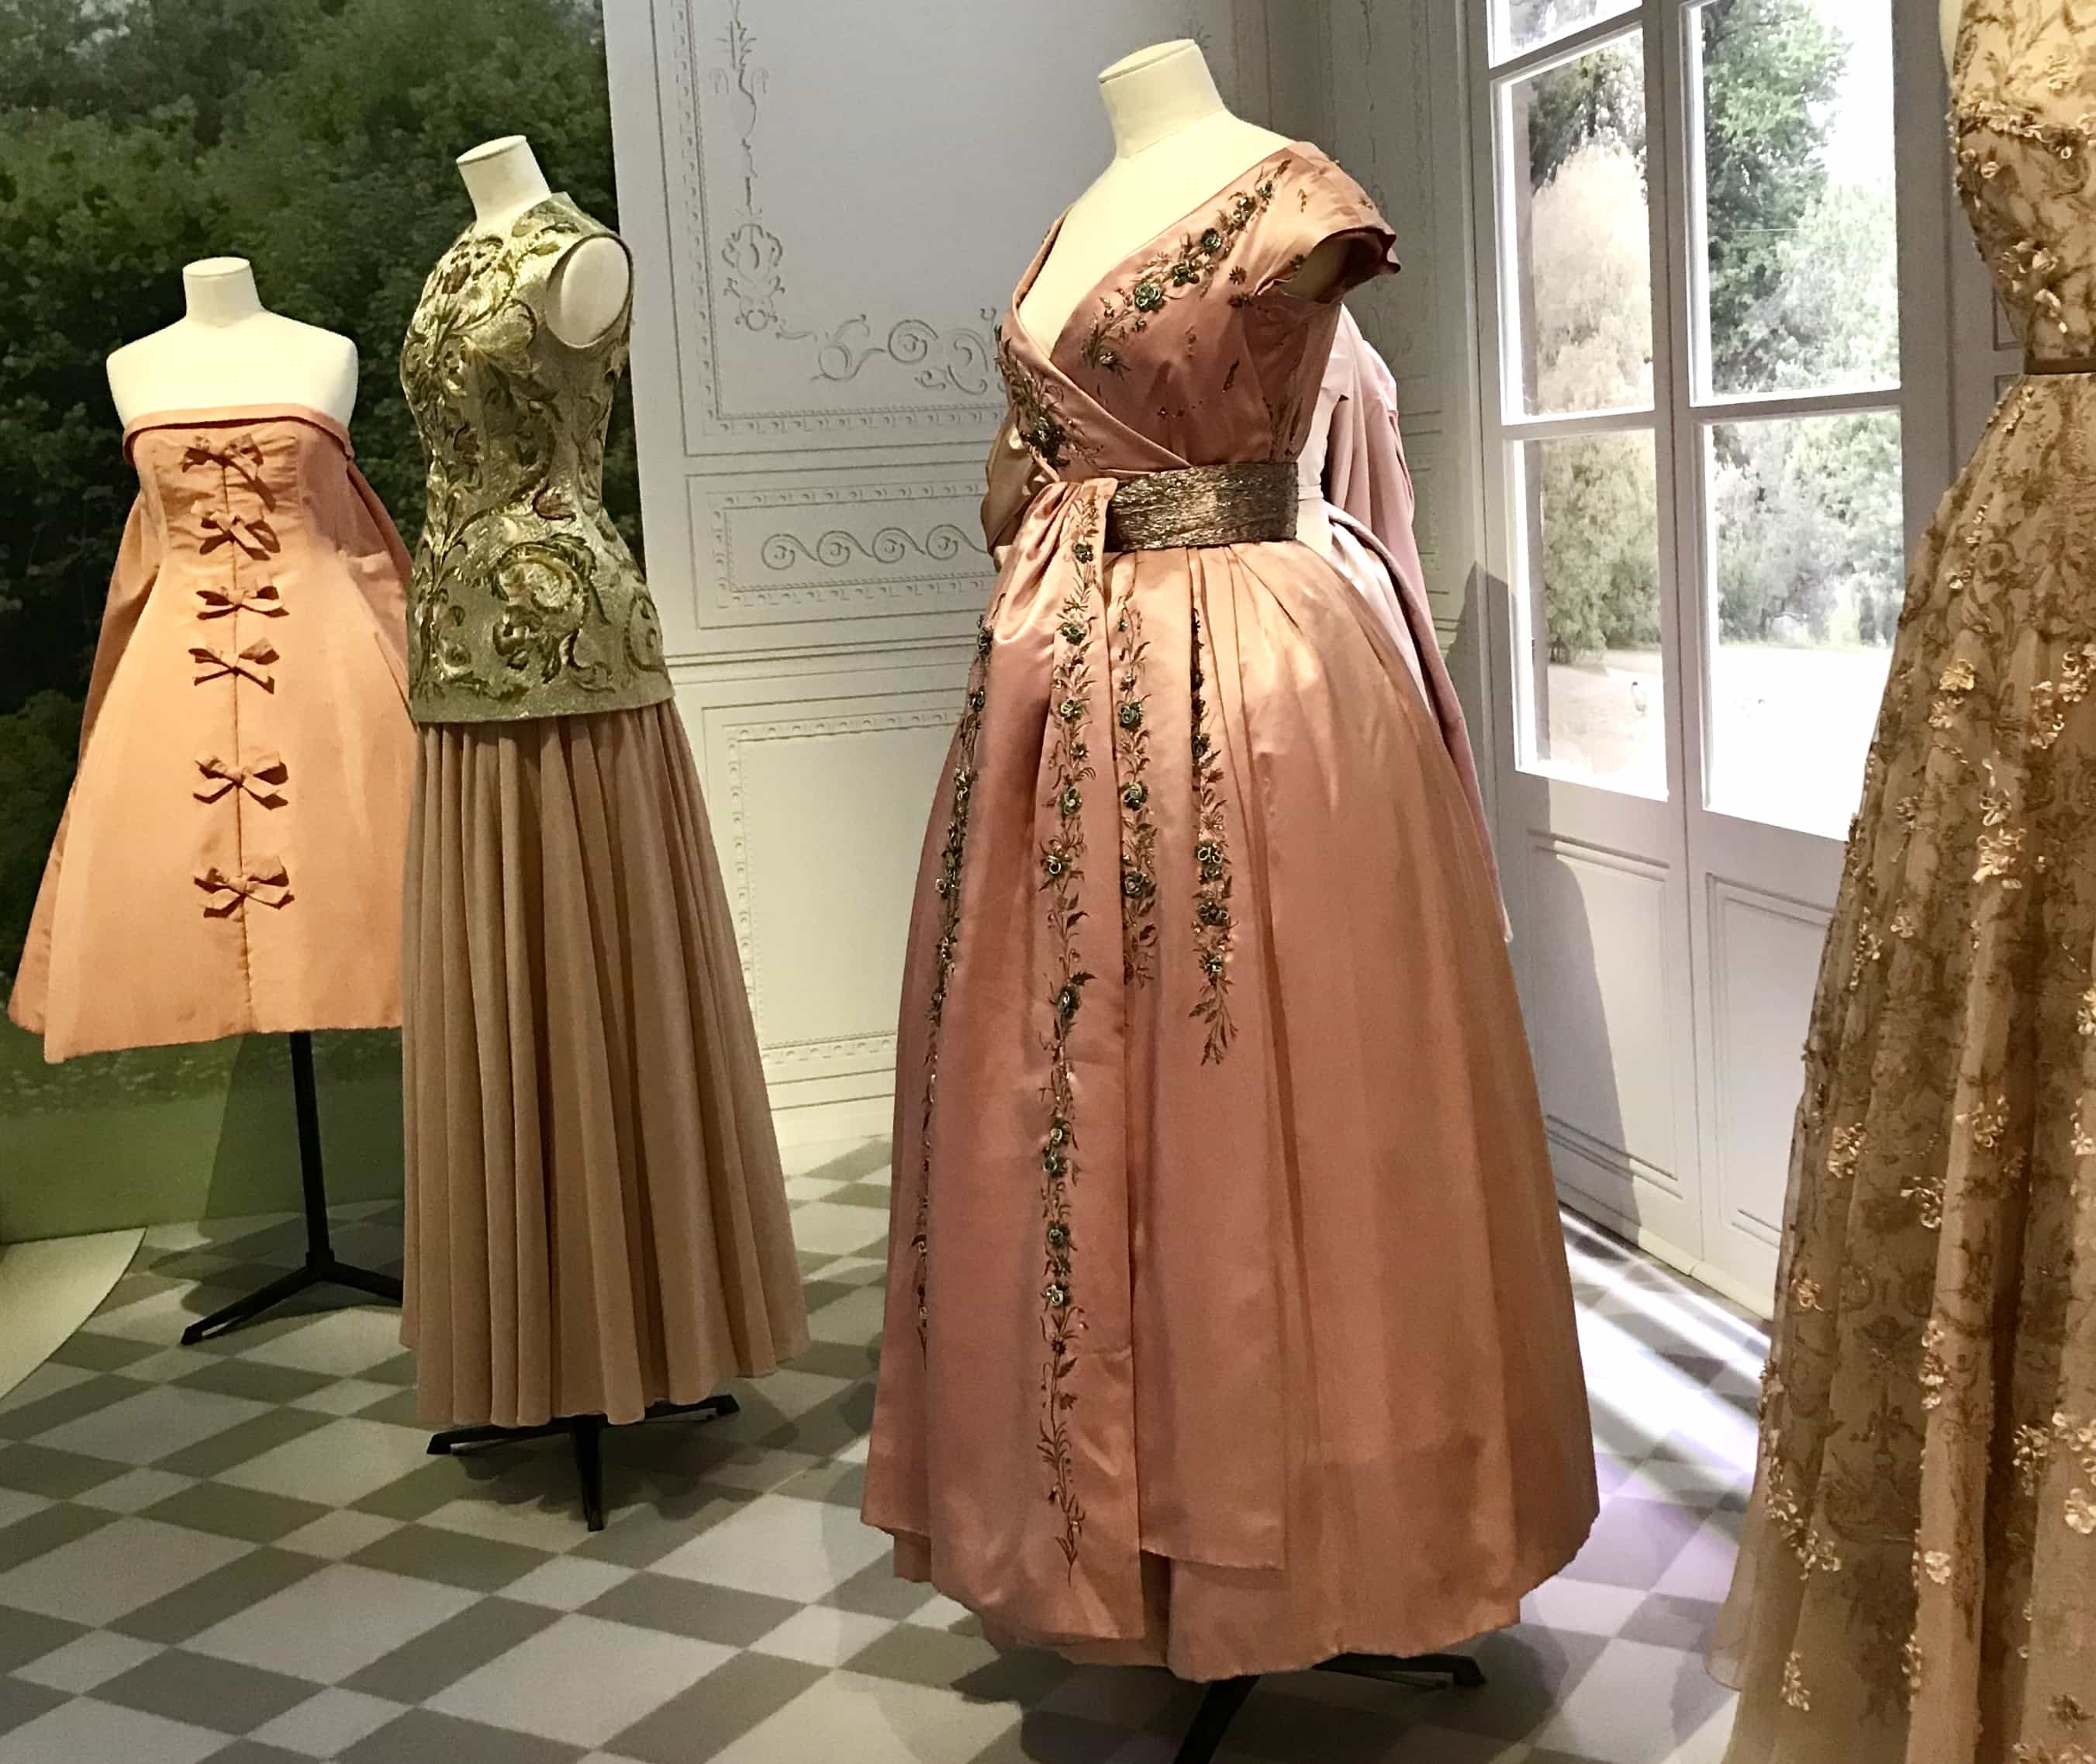 The Christian Dior Designer of Dreams Exhibition at the V&A